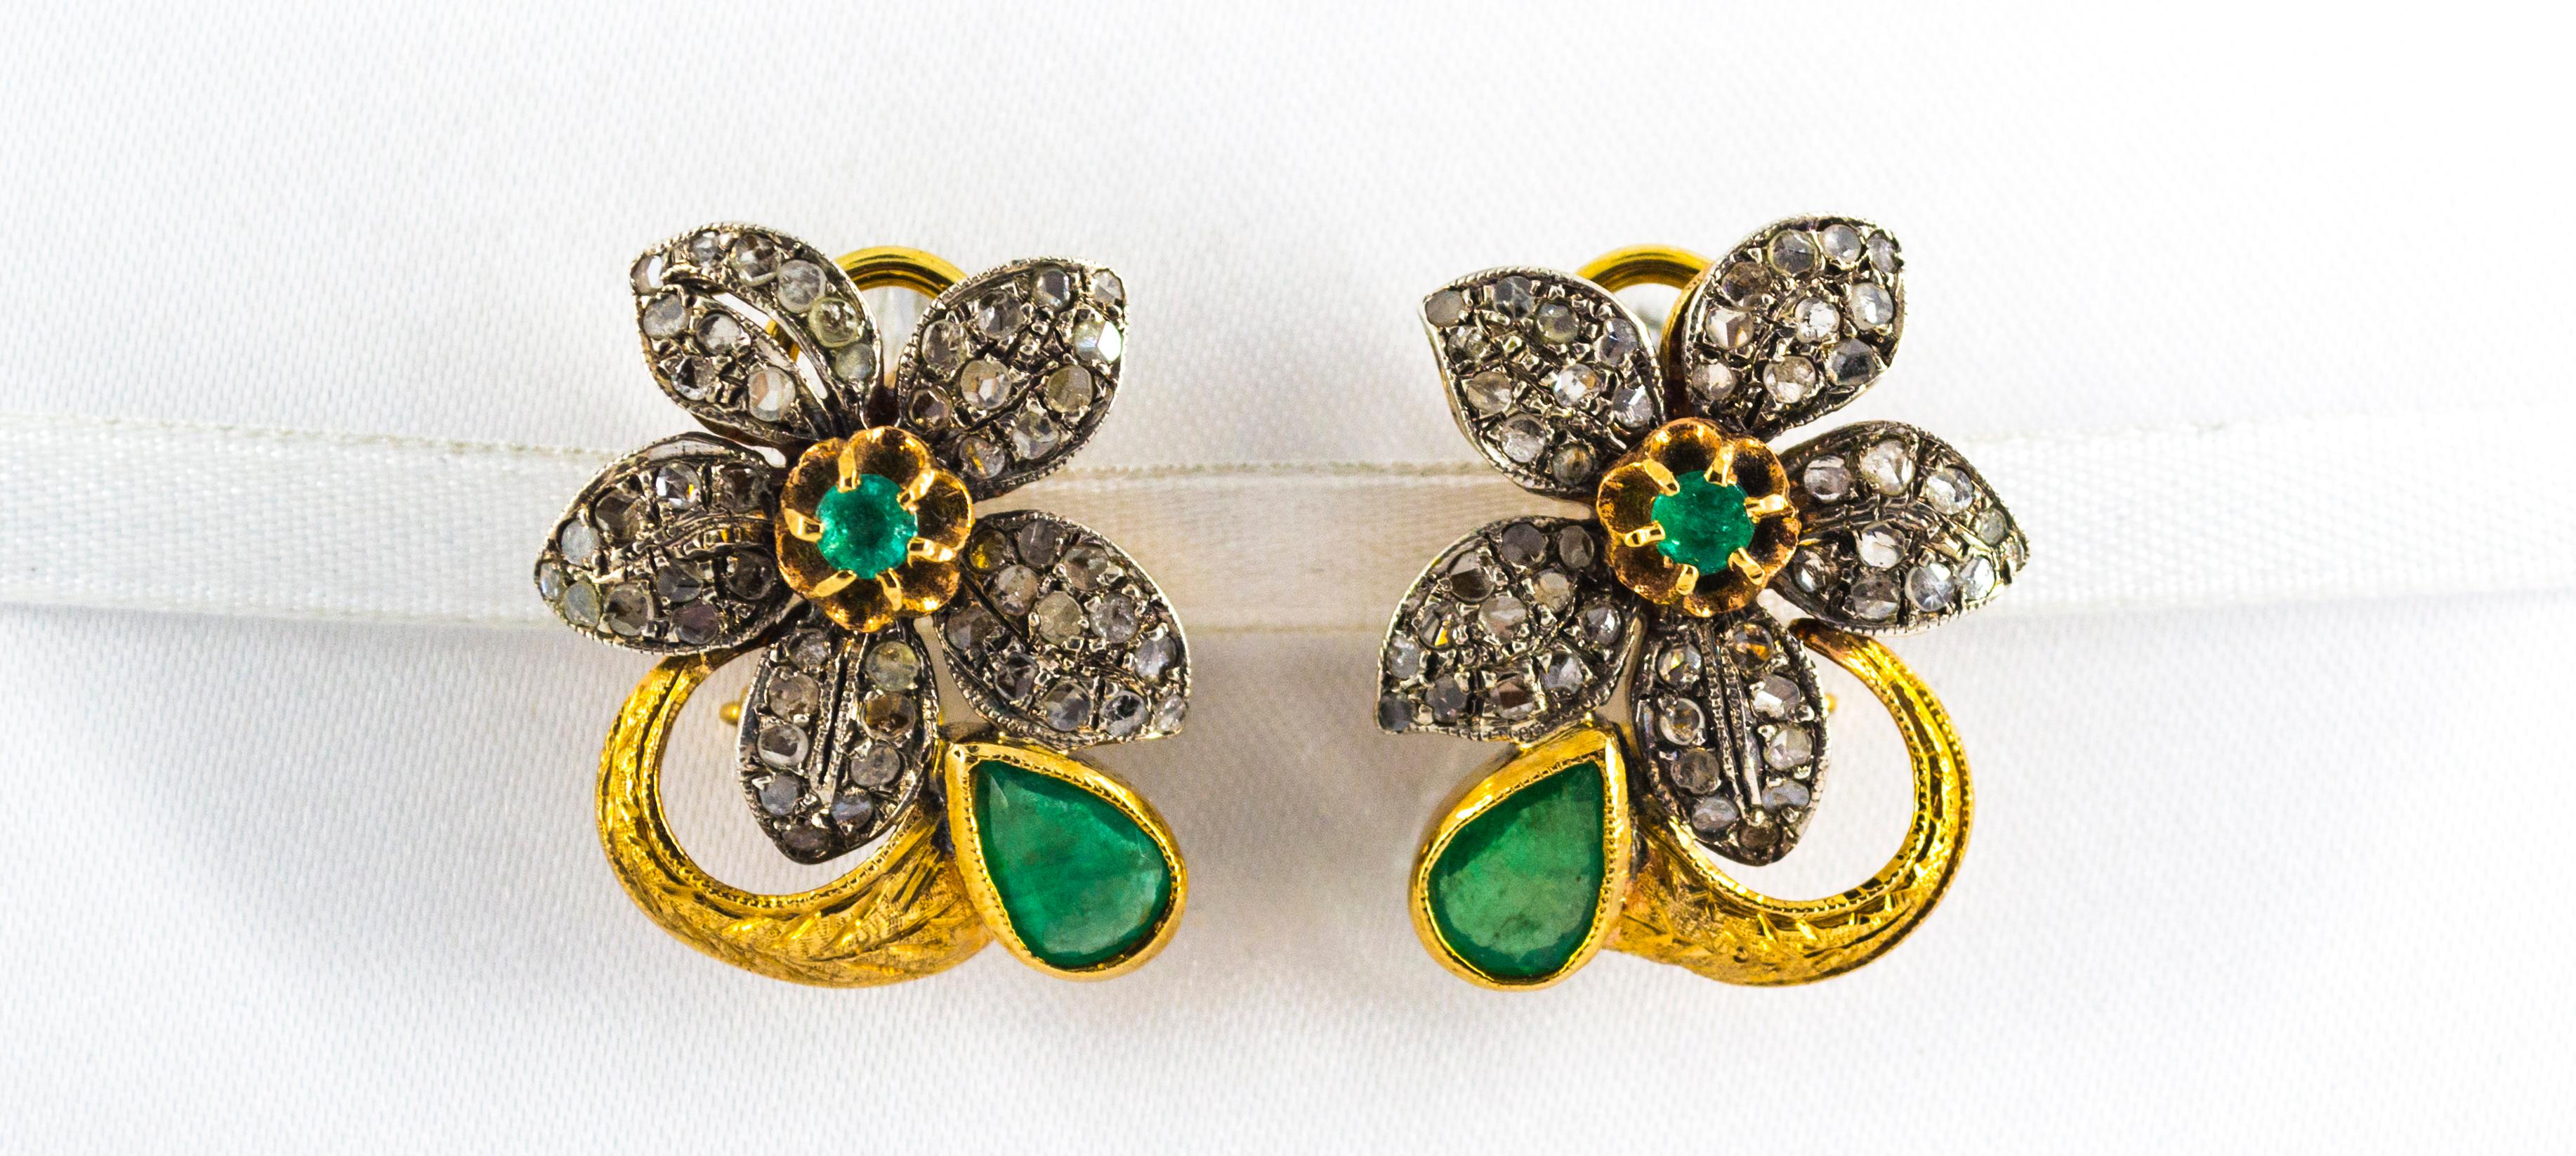 These Earrings are made of 9K Yellow Gold and Sterling Silver.
These Earrings have 0.60 Carats of White Rose Cut Diamonds.
These Earrings have 2.00 Carats of Emeralds.
All our Earrings have pins for pierced ears but we can change the closure and